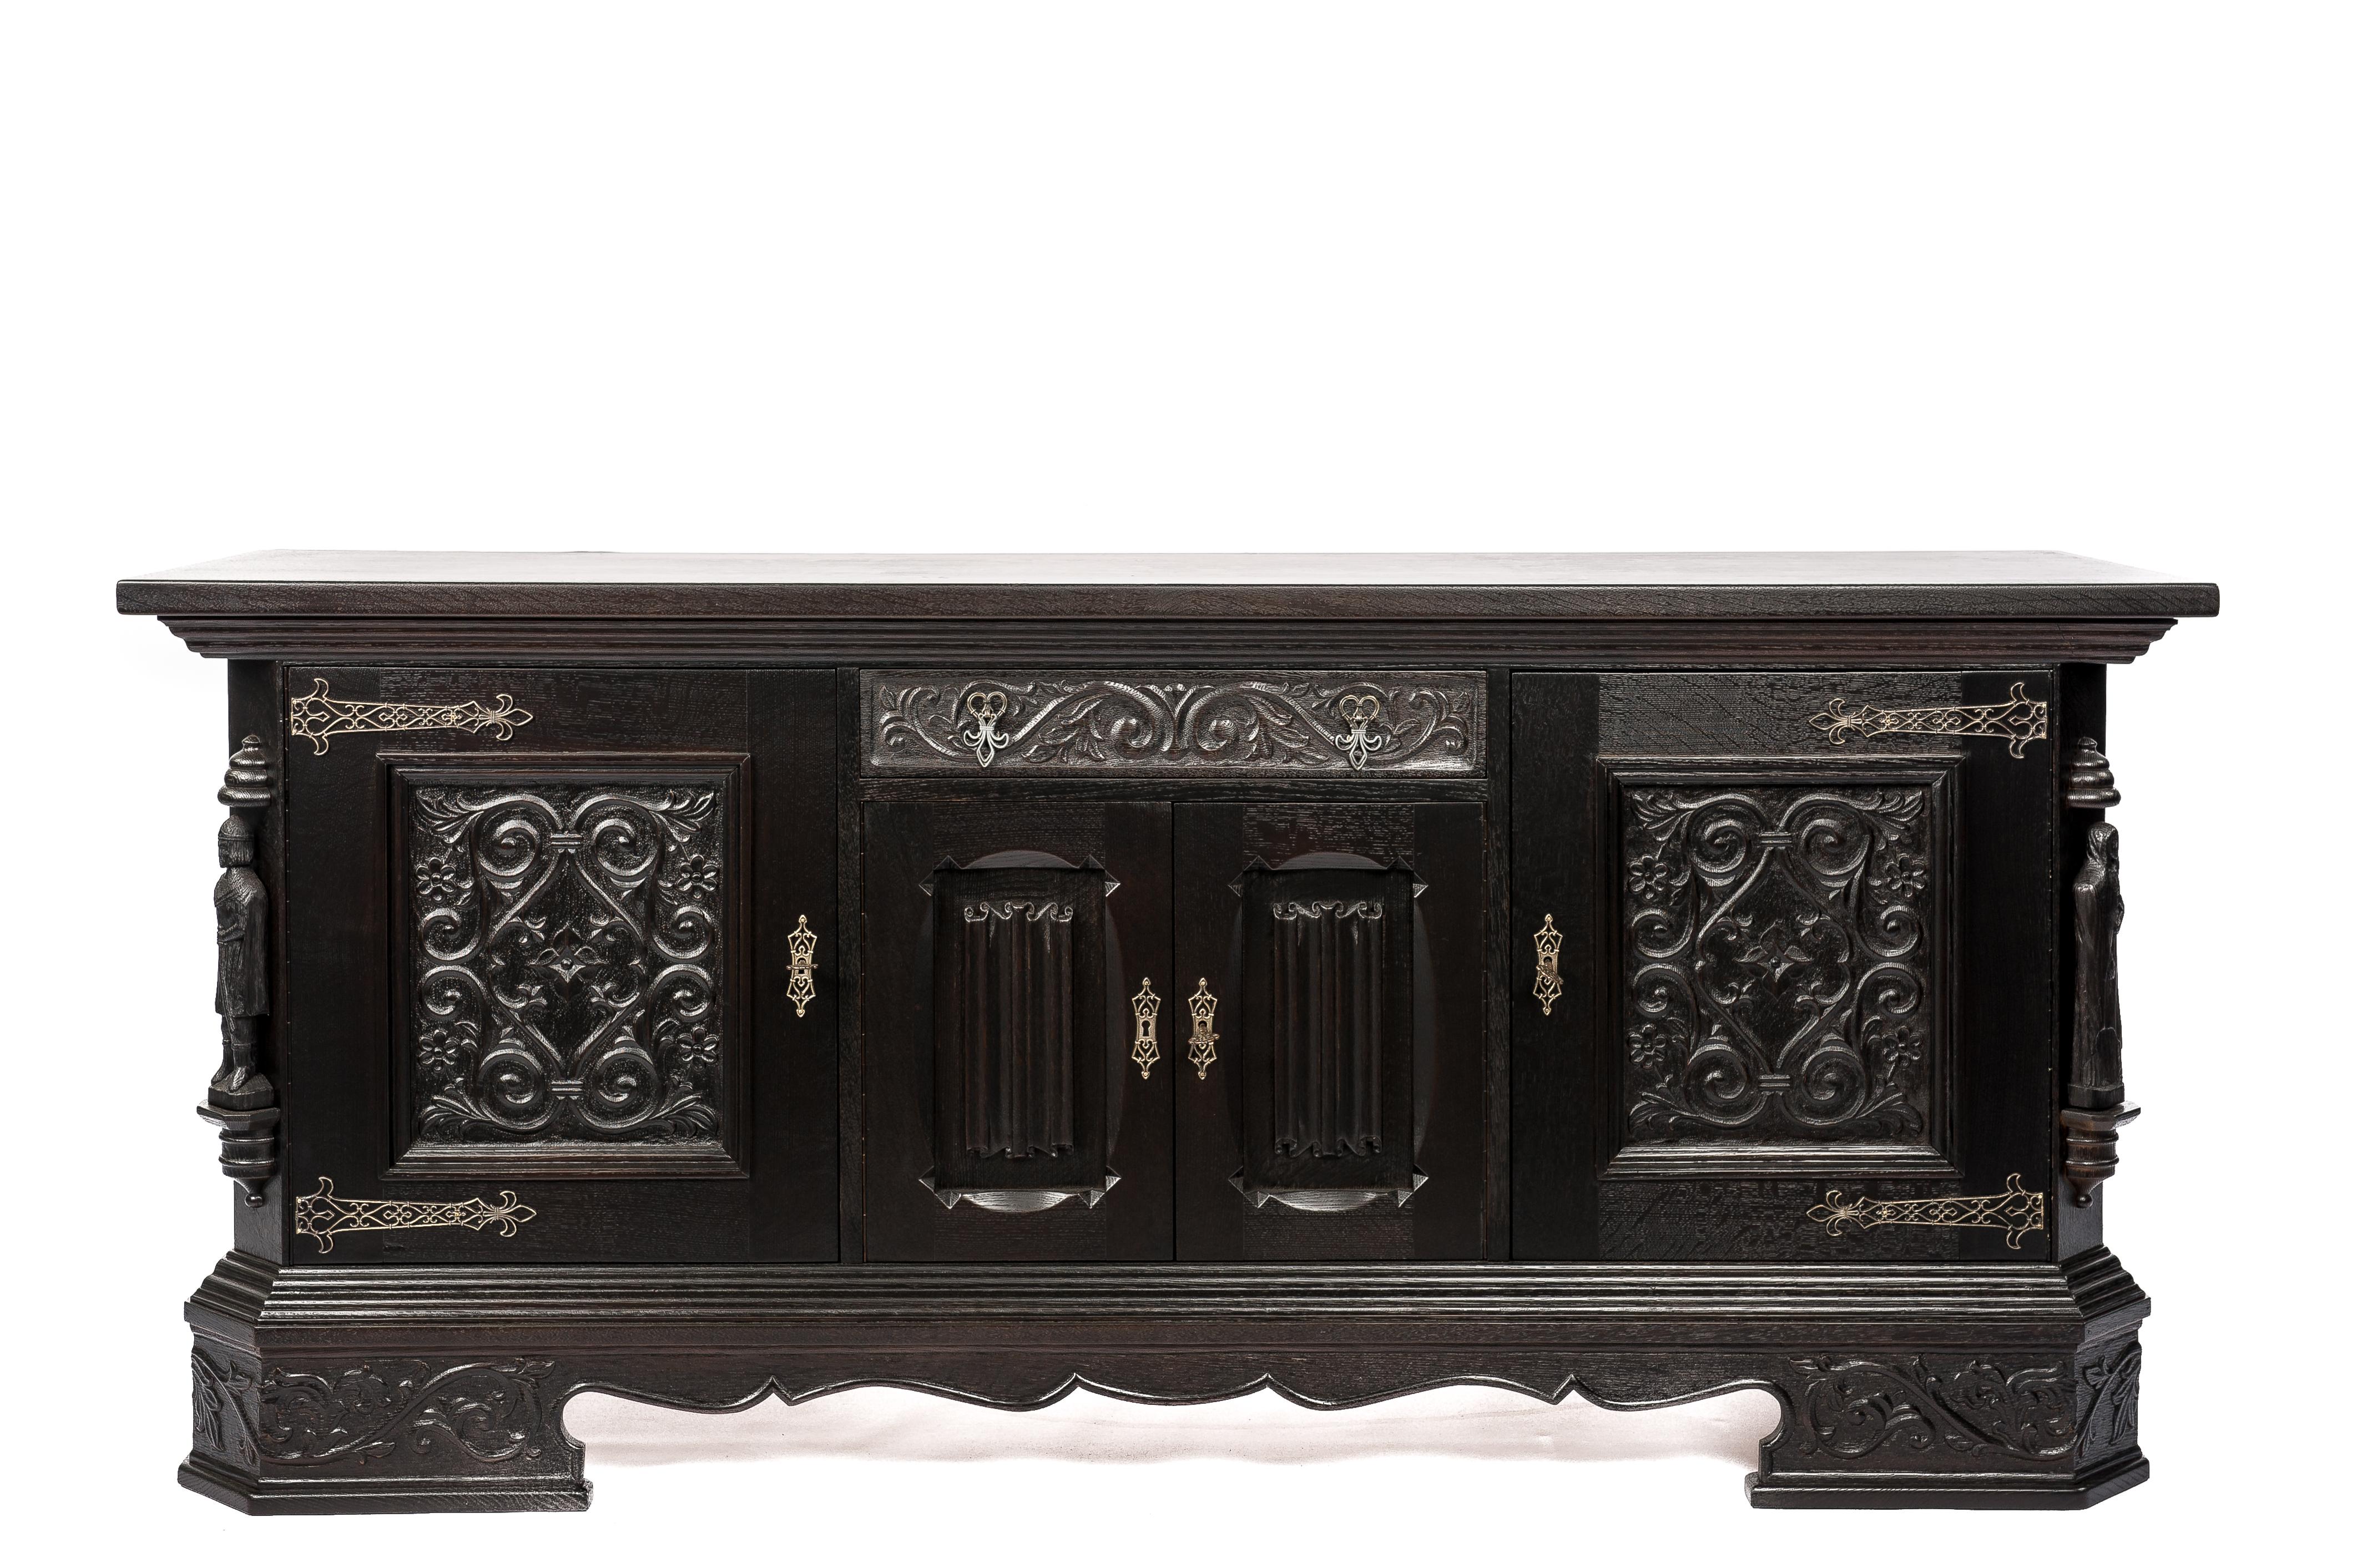 This beautiful Gothic server buffet or credenza was made in Belgium in the early 20st century. It is a well-made piece that shows great craftsmanship. The buffet is made in the finest quality European summer oak and it was adorned with hand-carved